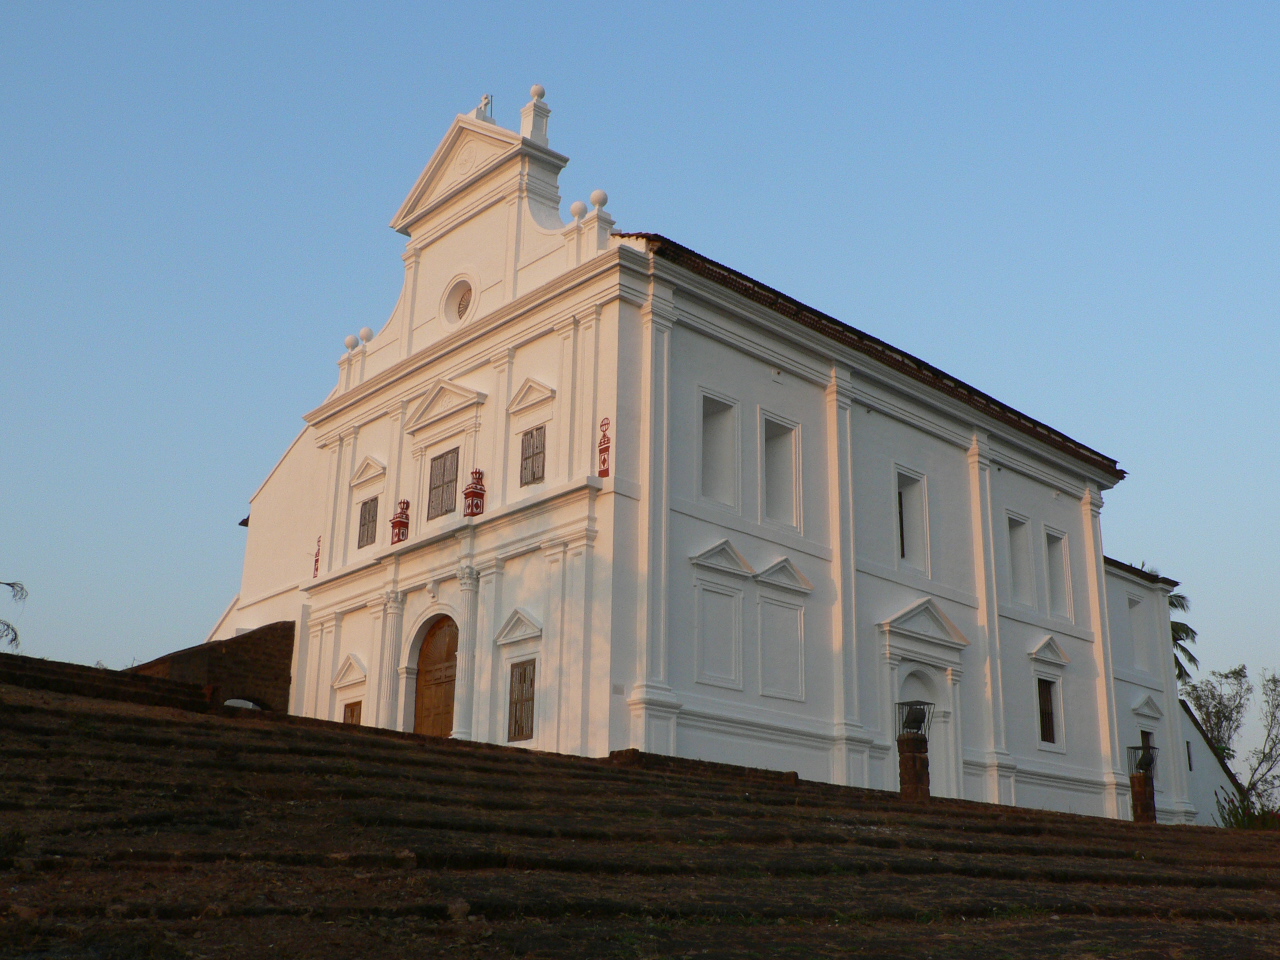 5 Churches in and around South Goa to usher in the Yuletide spirit